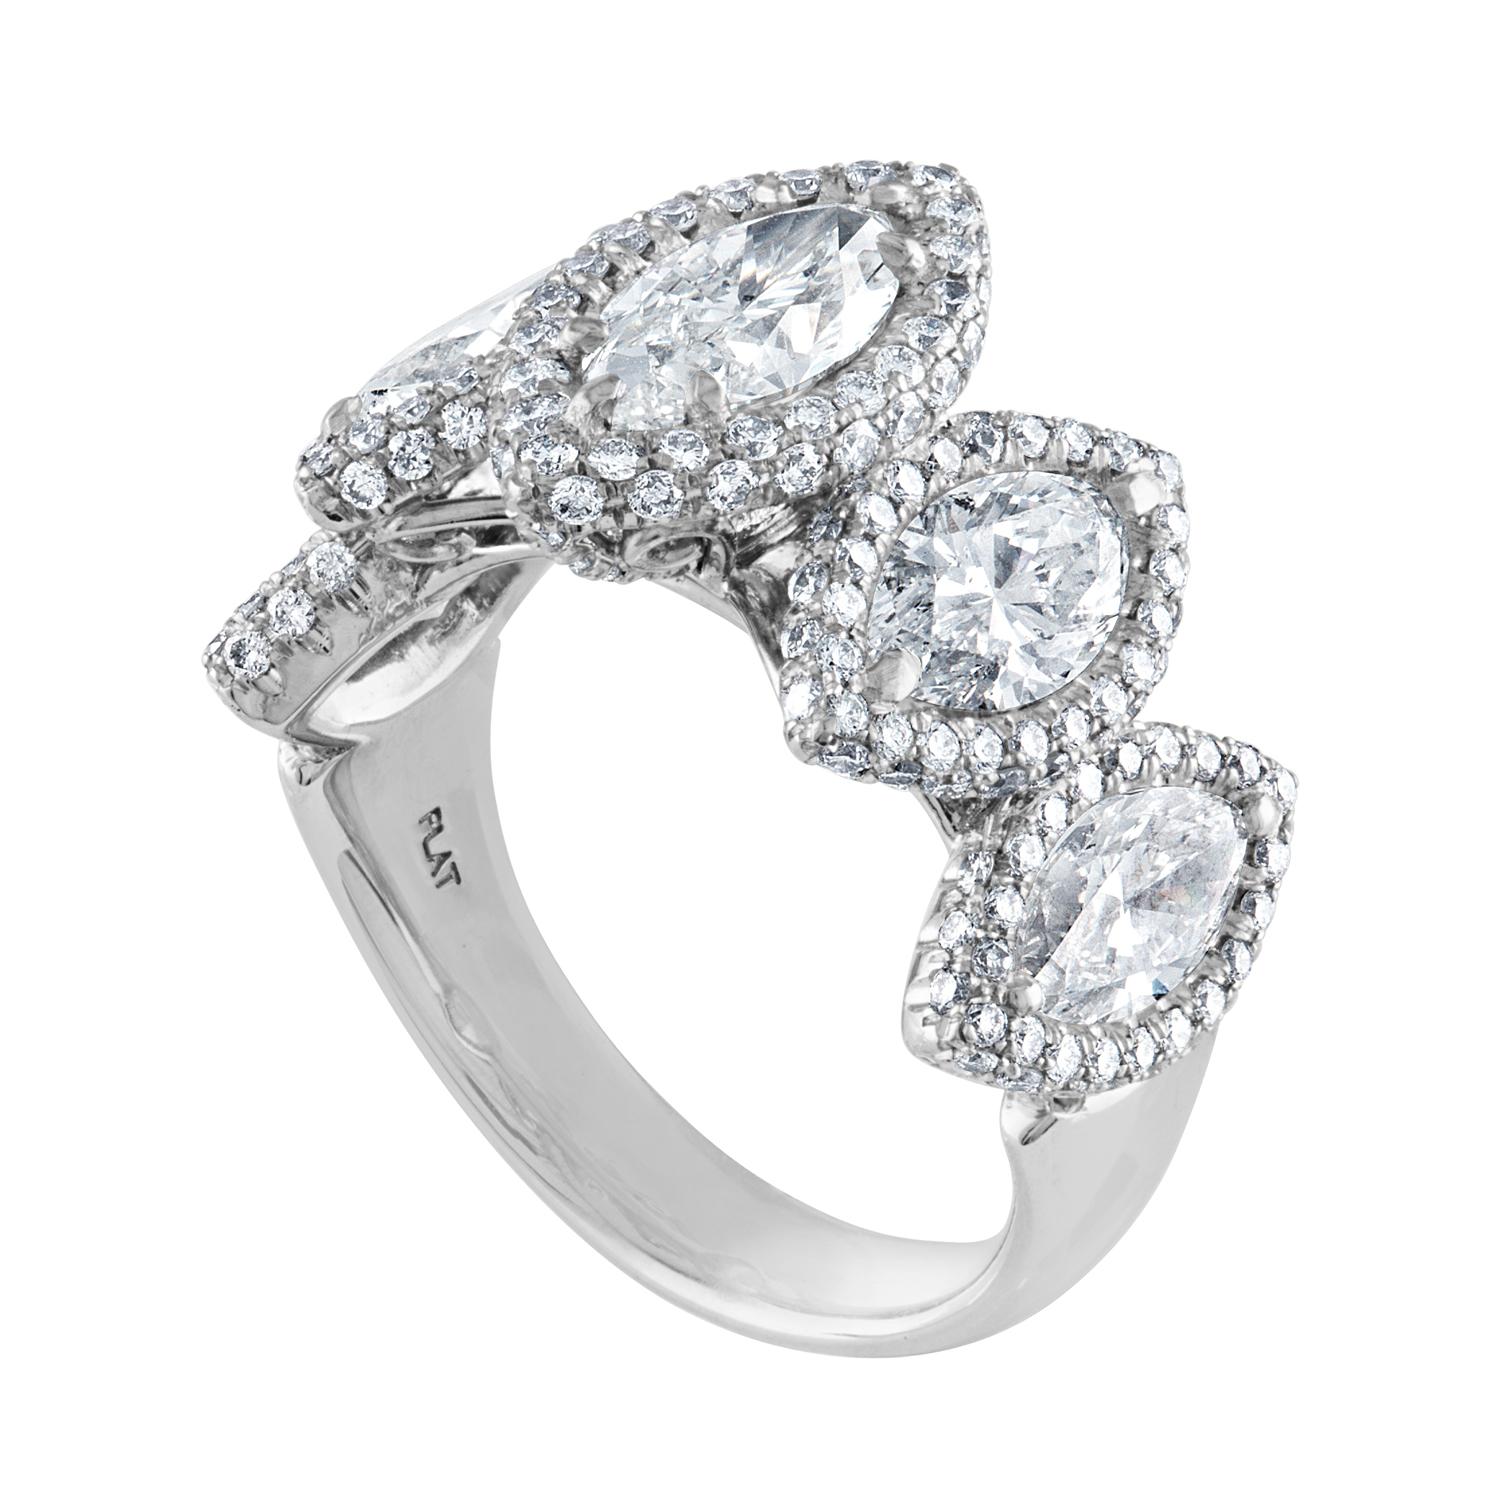 5 stone Marquise Cut Ring
The ring is Platinum
The ring has a center stone GIA 0.94CT H SI1
The 4 side stones 2.25Ct H VS/SI
There are 1.04CT in small round diamonds G/H VS.
All Diamonds weigh together 4.23 Carats.
The ring is a size 6.75,